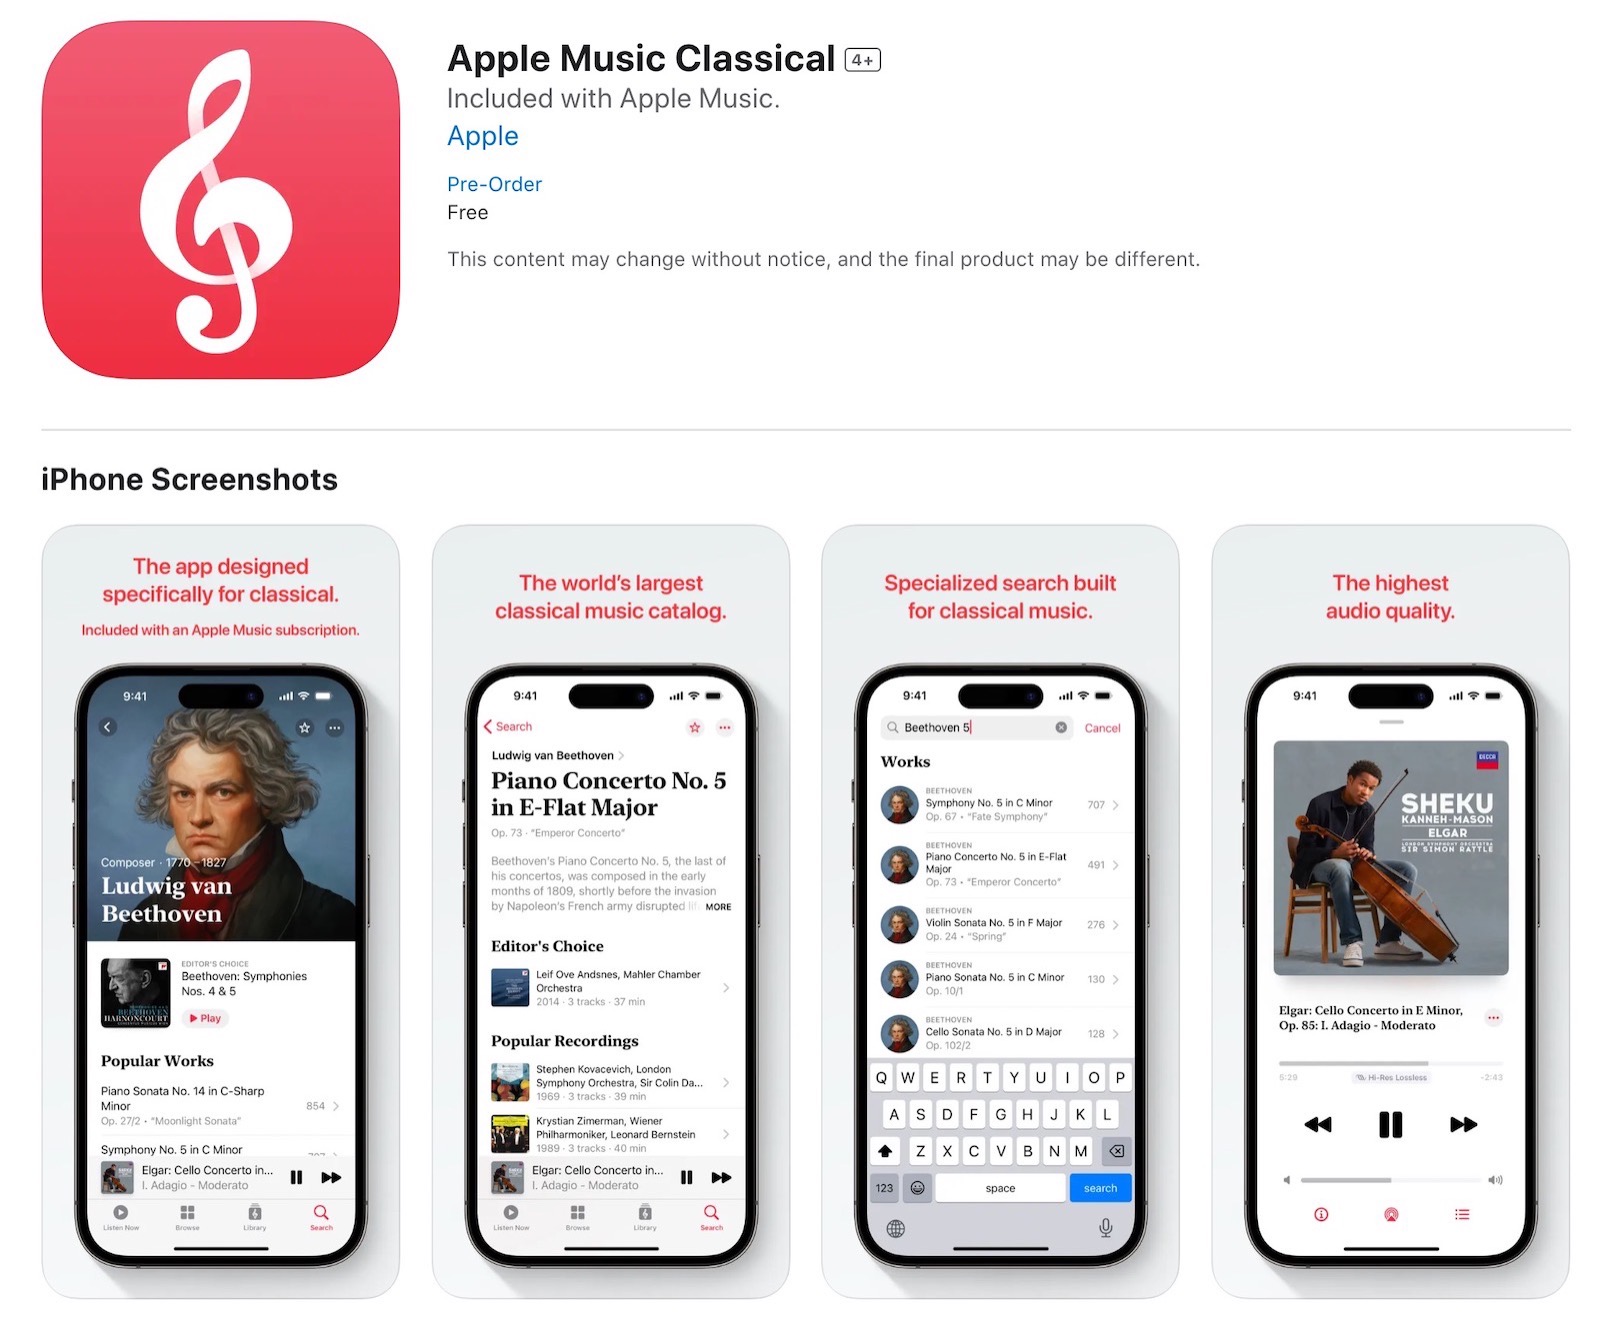 Apple Music Classical on the app store